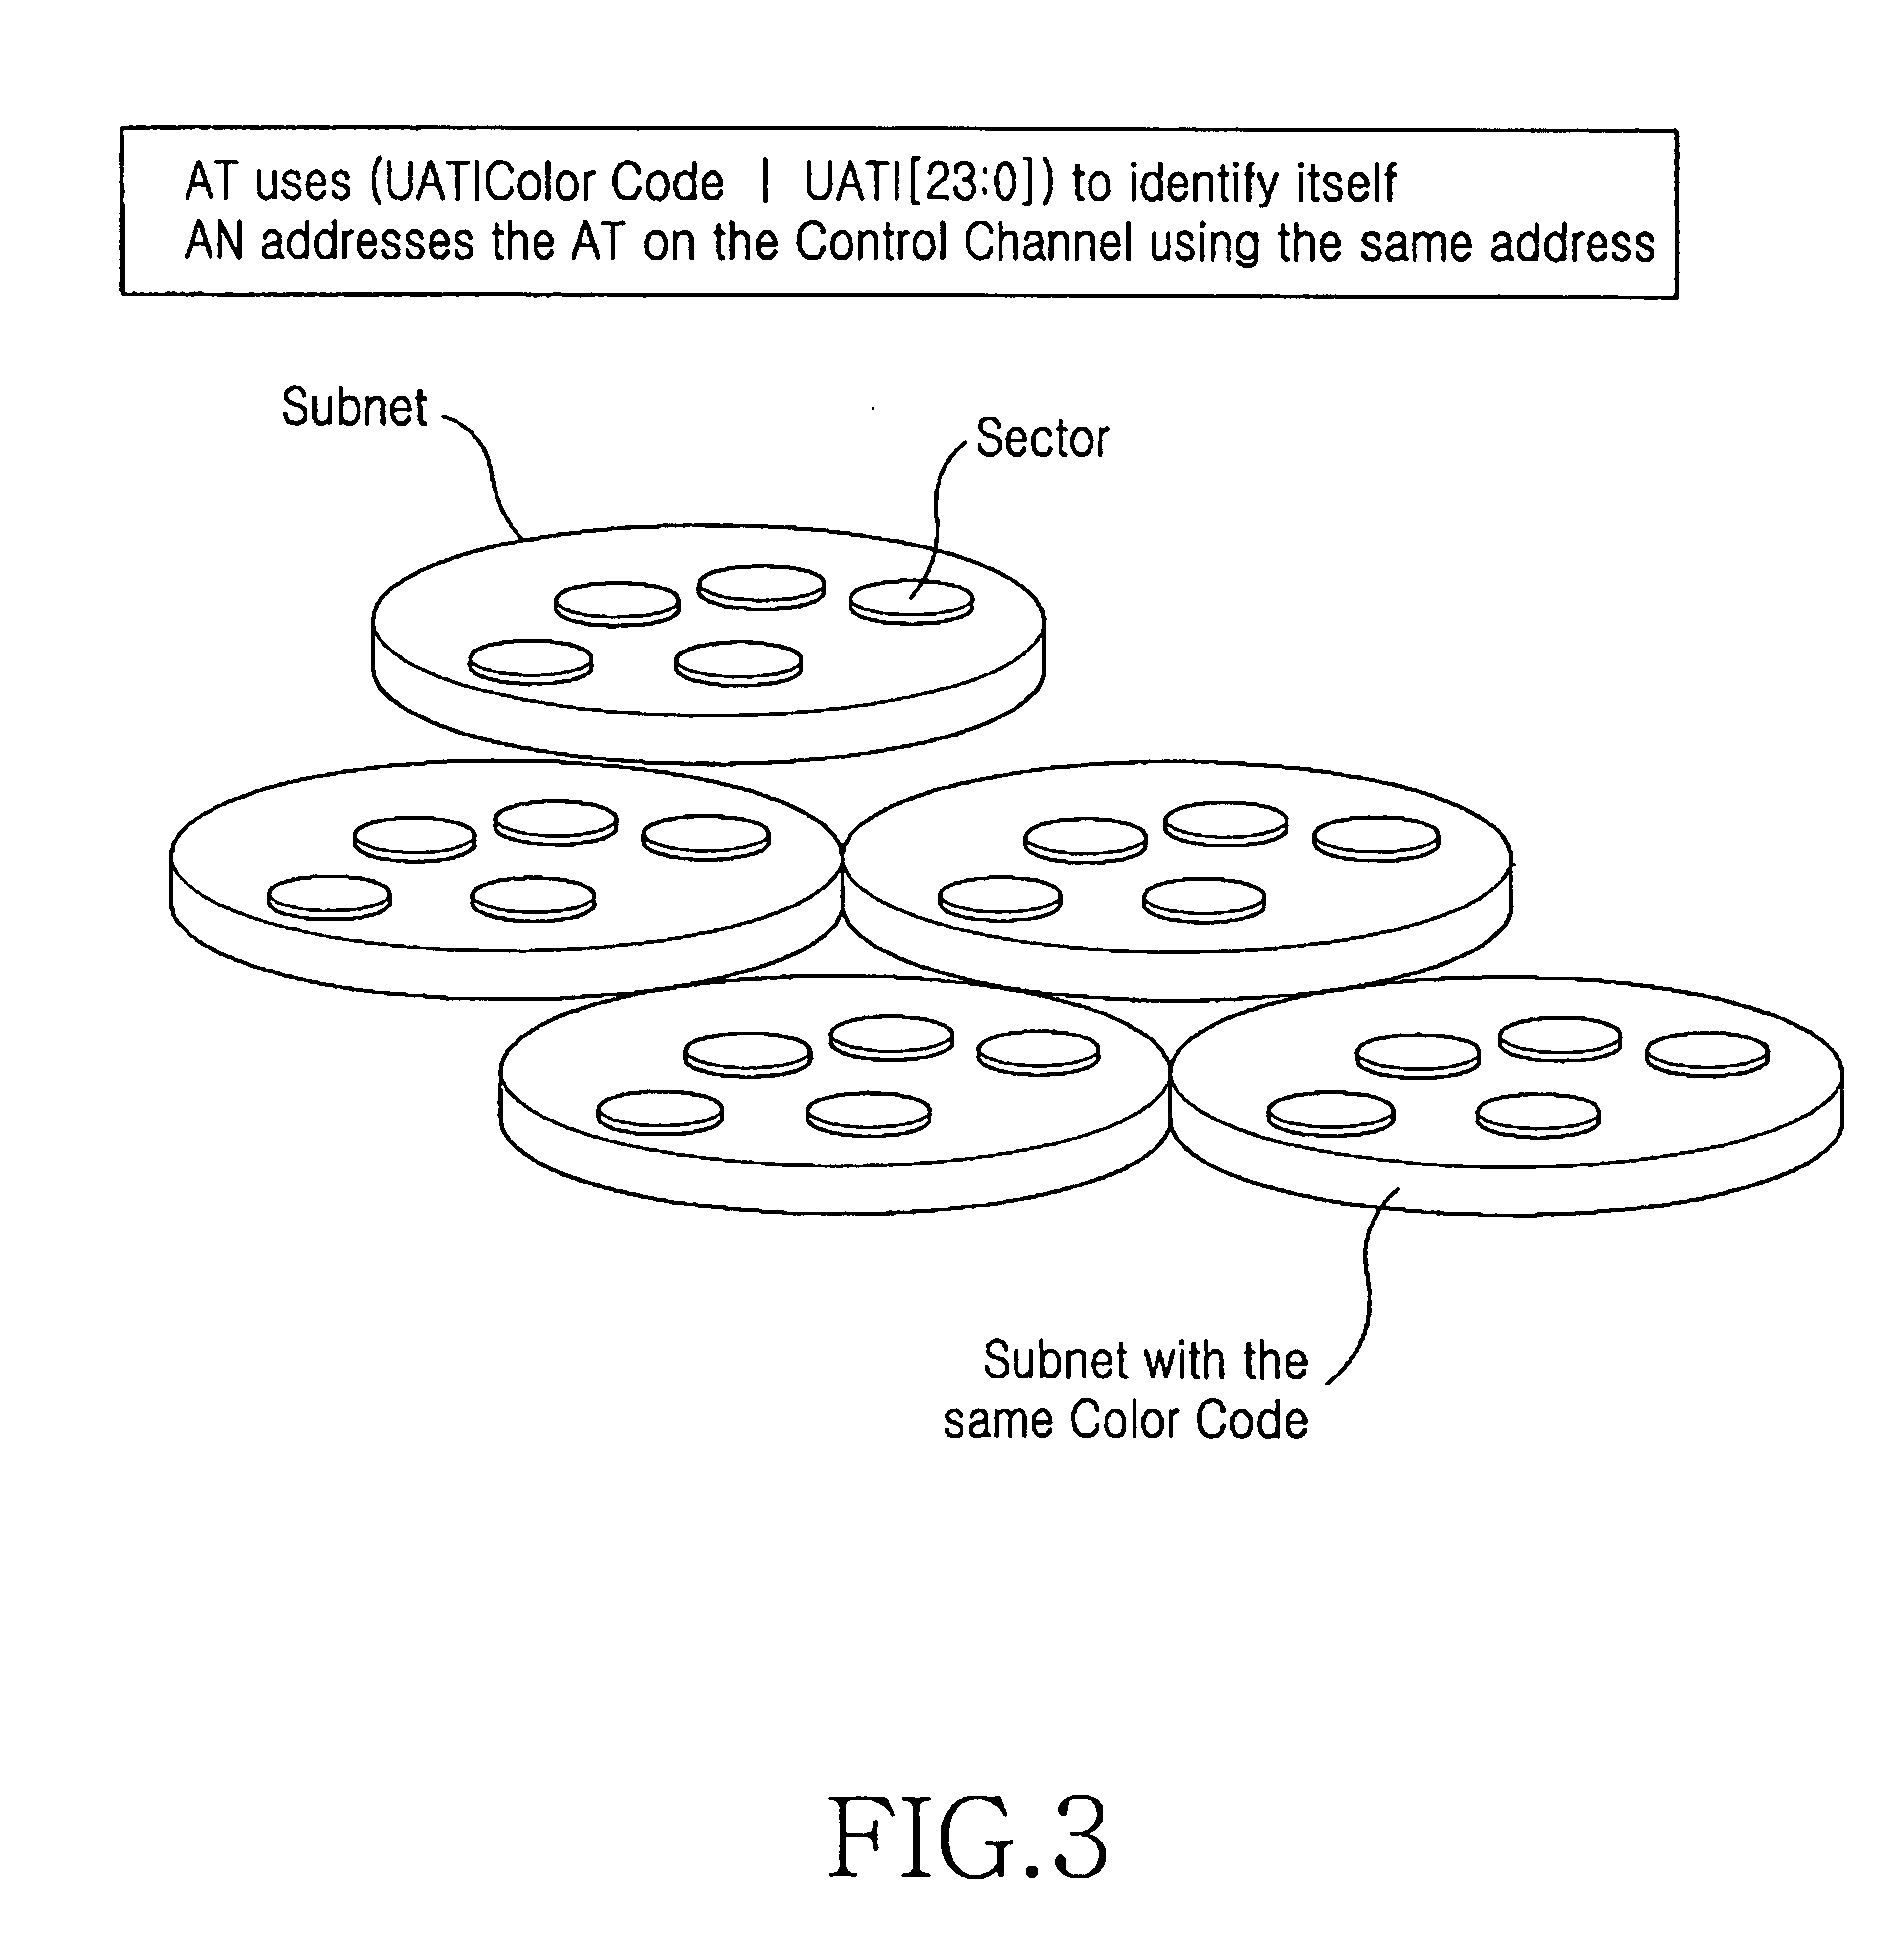 Apparatus and method for triggering session re-negotiation between access network and access terminal in a high rate packet data system